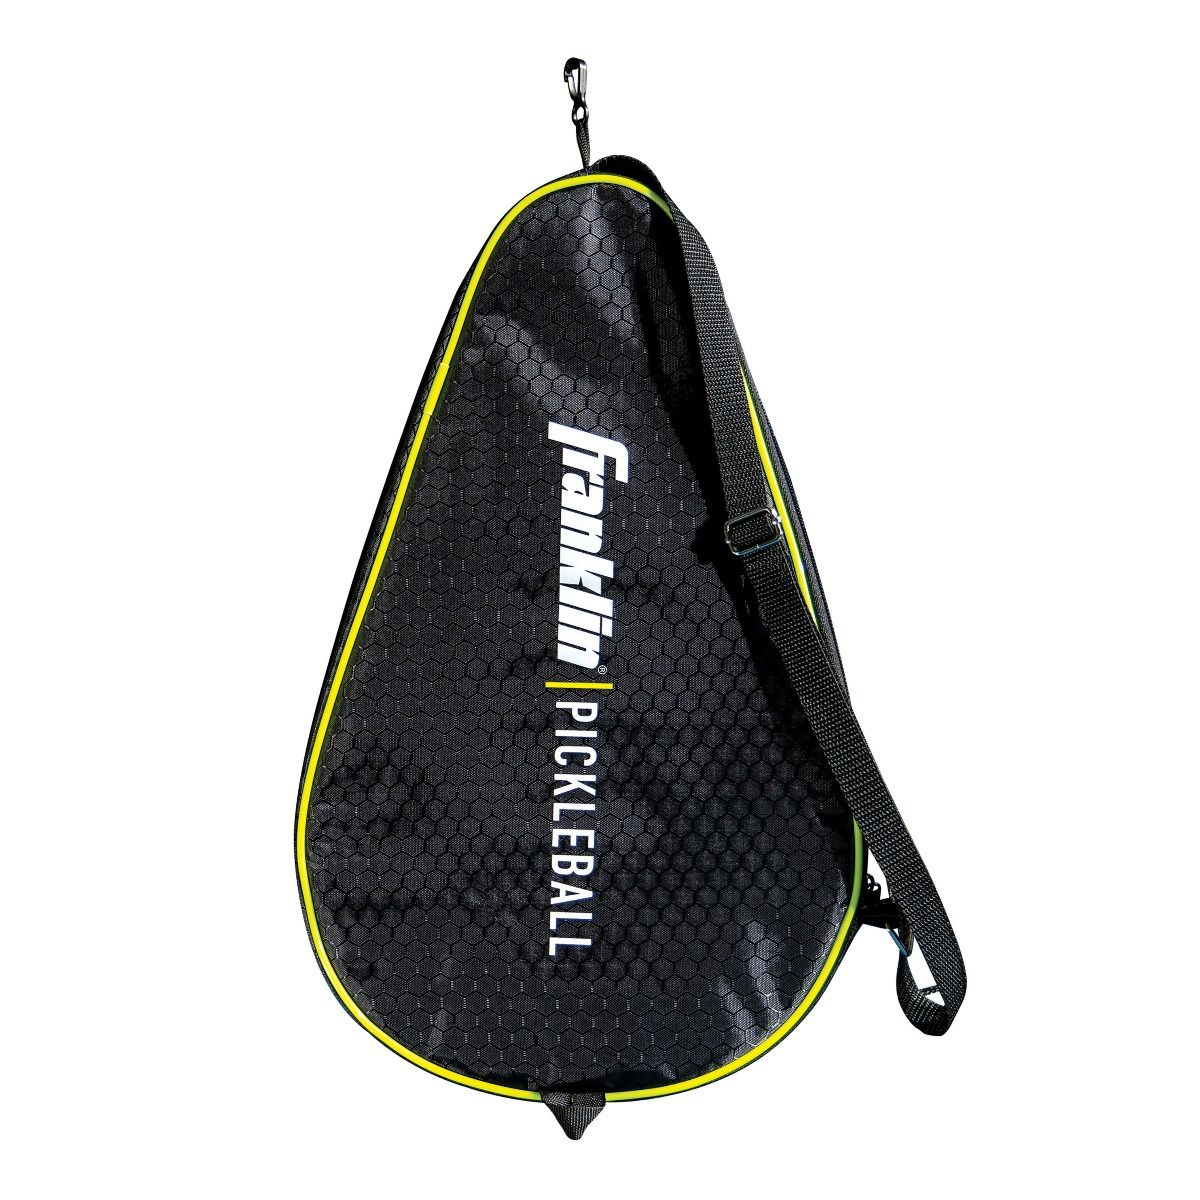 A black and yellow Franklin tennis bag with a padded carry strap.